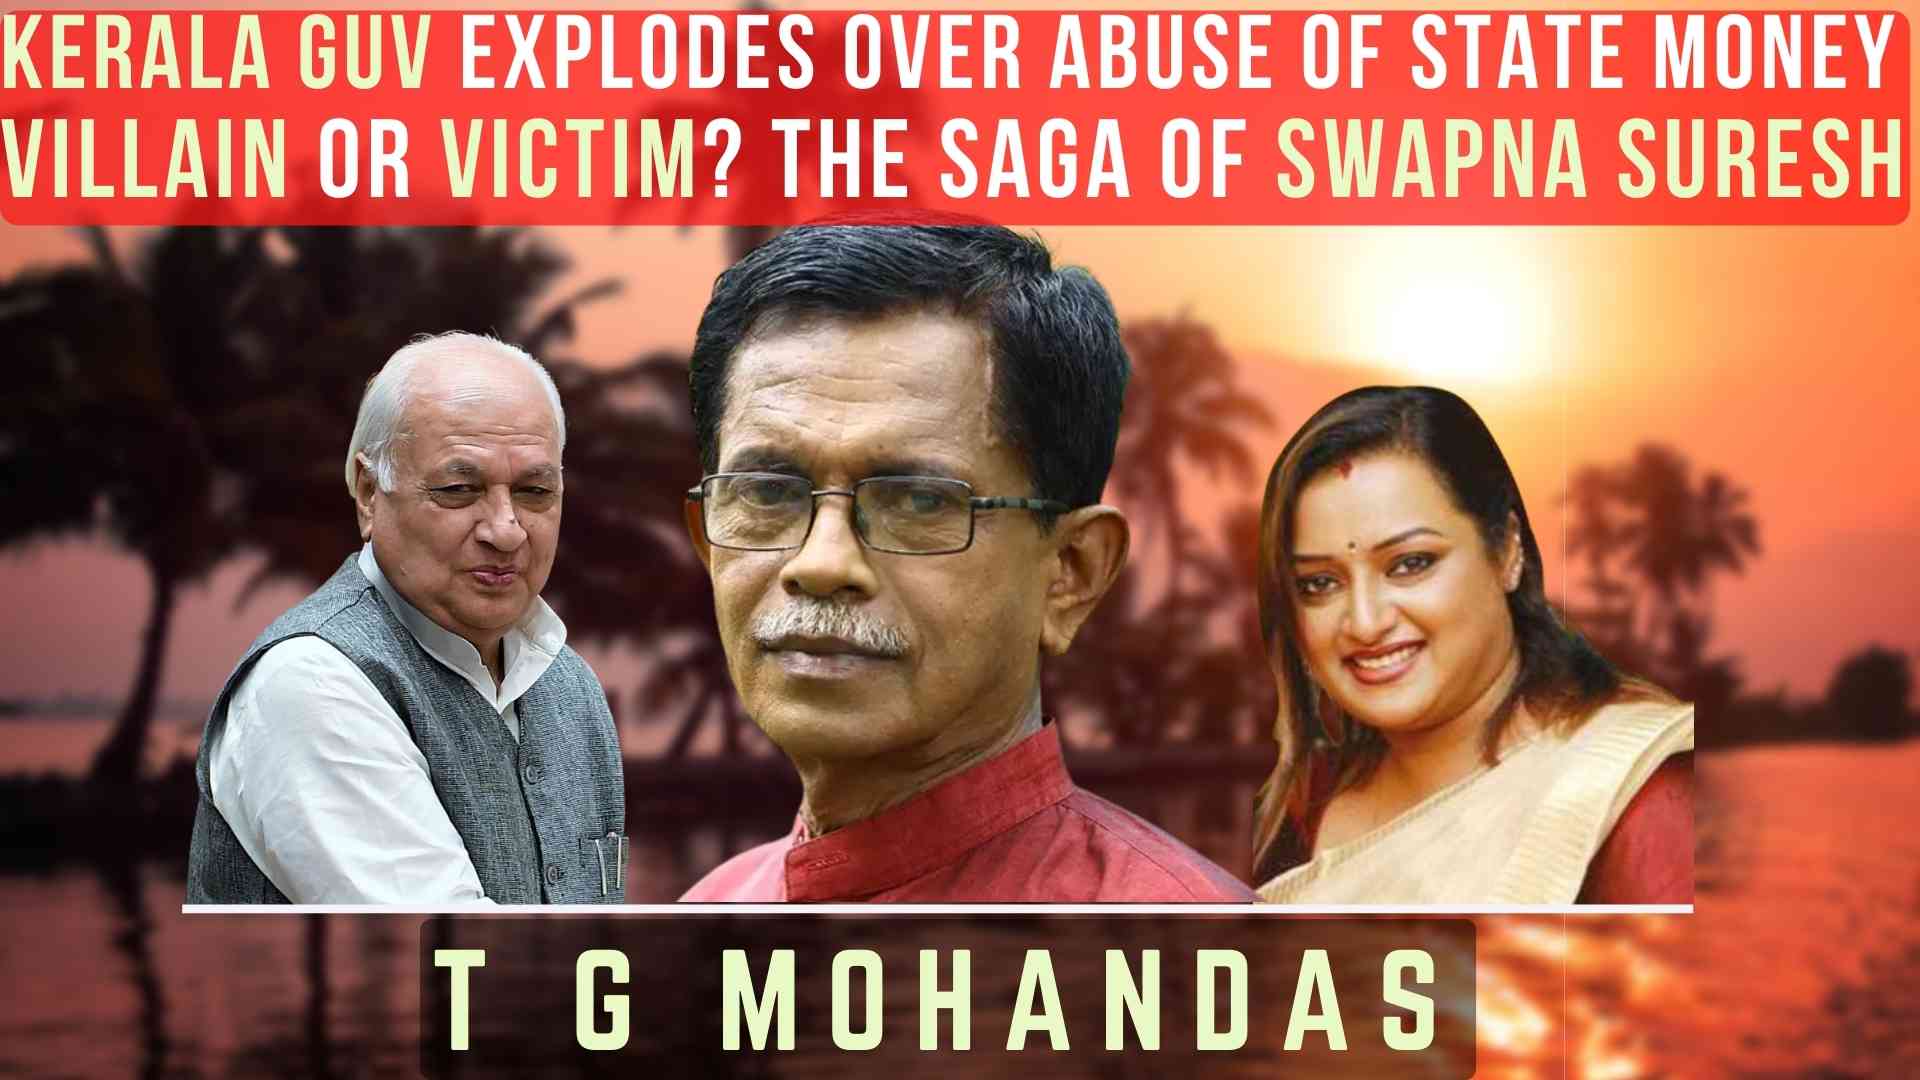 With T G Mohandas on 2 issues: 1. Free pensions for CPM Party worker's scam: Governor explodes. The inside story of some of the pension plans that CPM put in place. 2. Villain or Victim: The saga of Swapna Suresh, the alleged link in the Gold Smuggling Chain